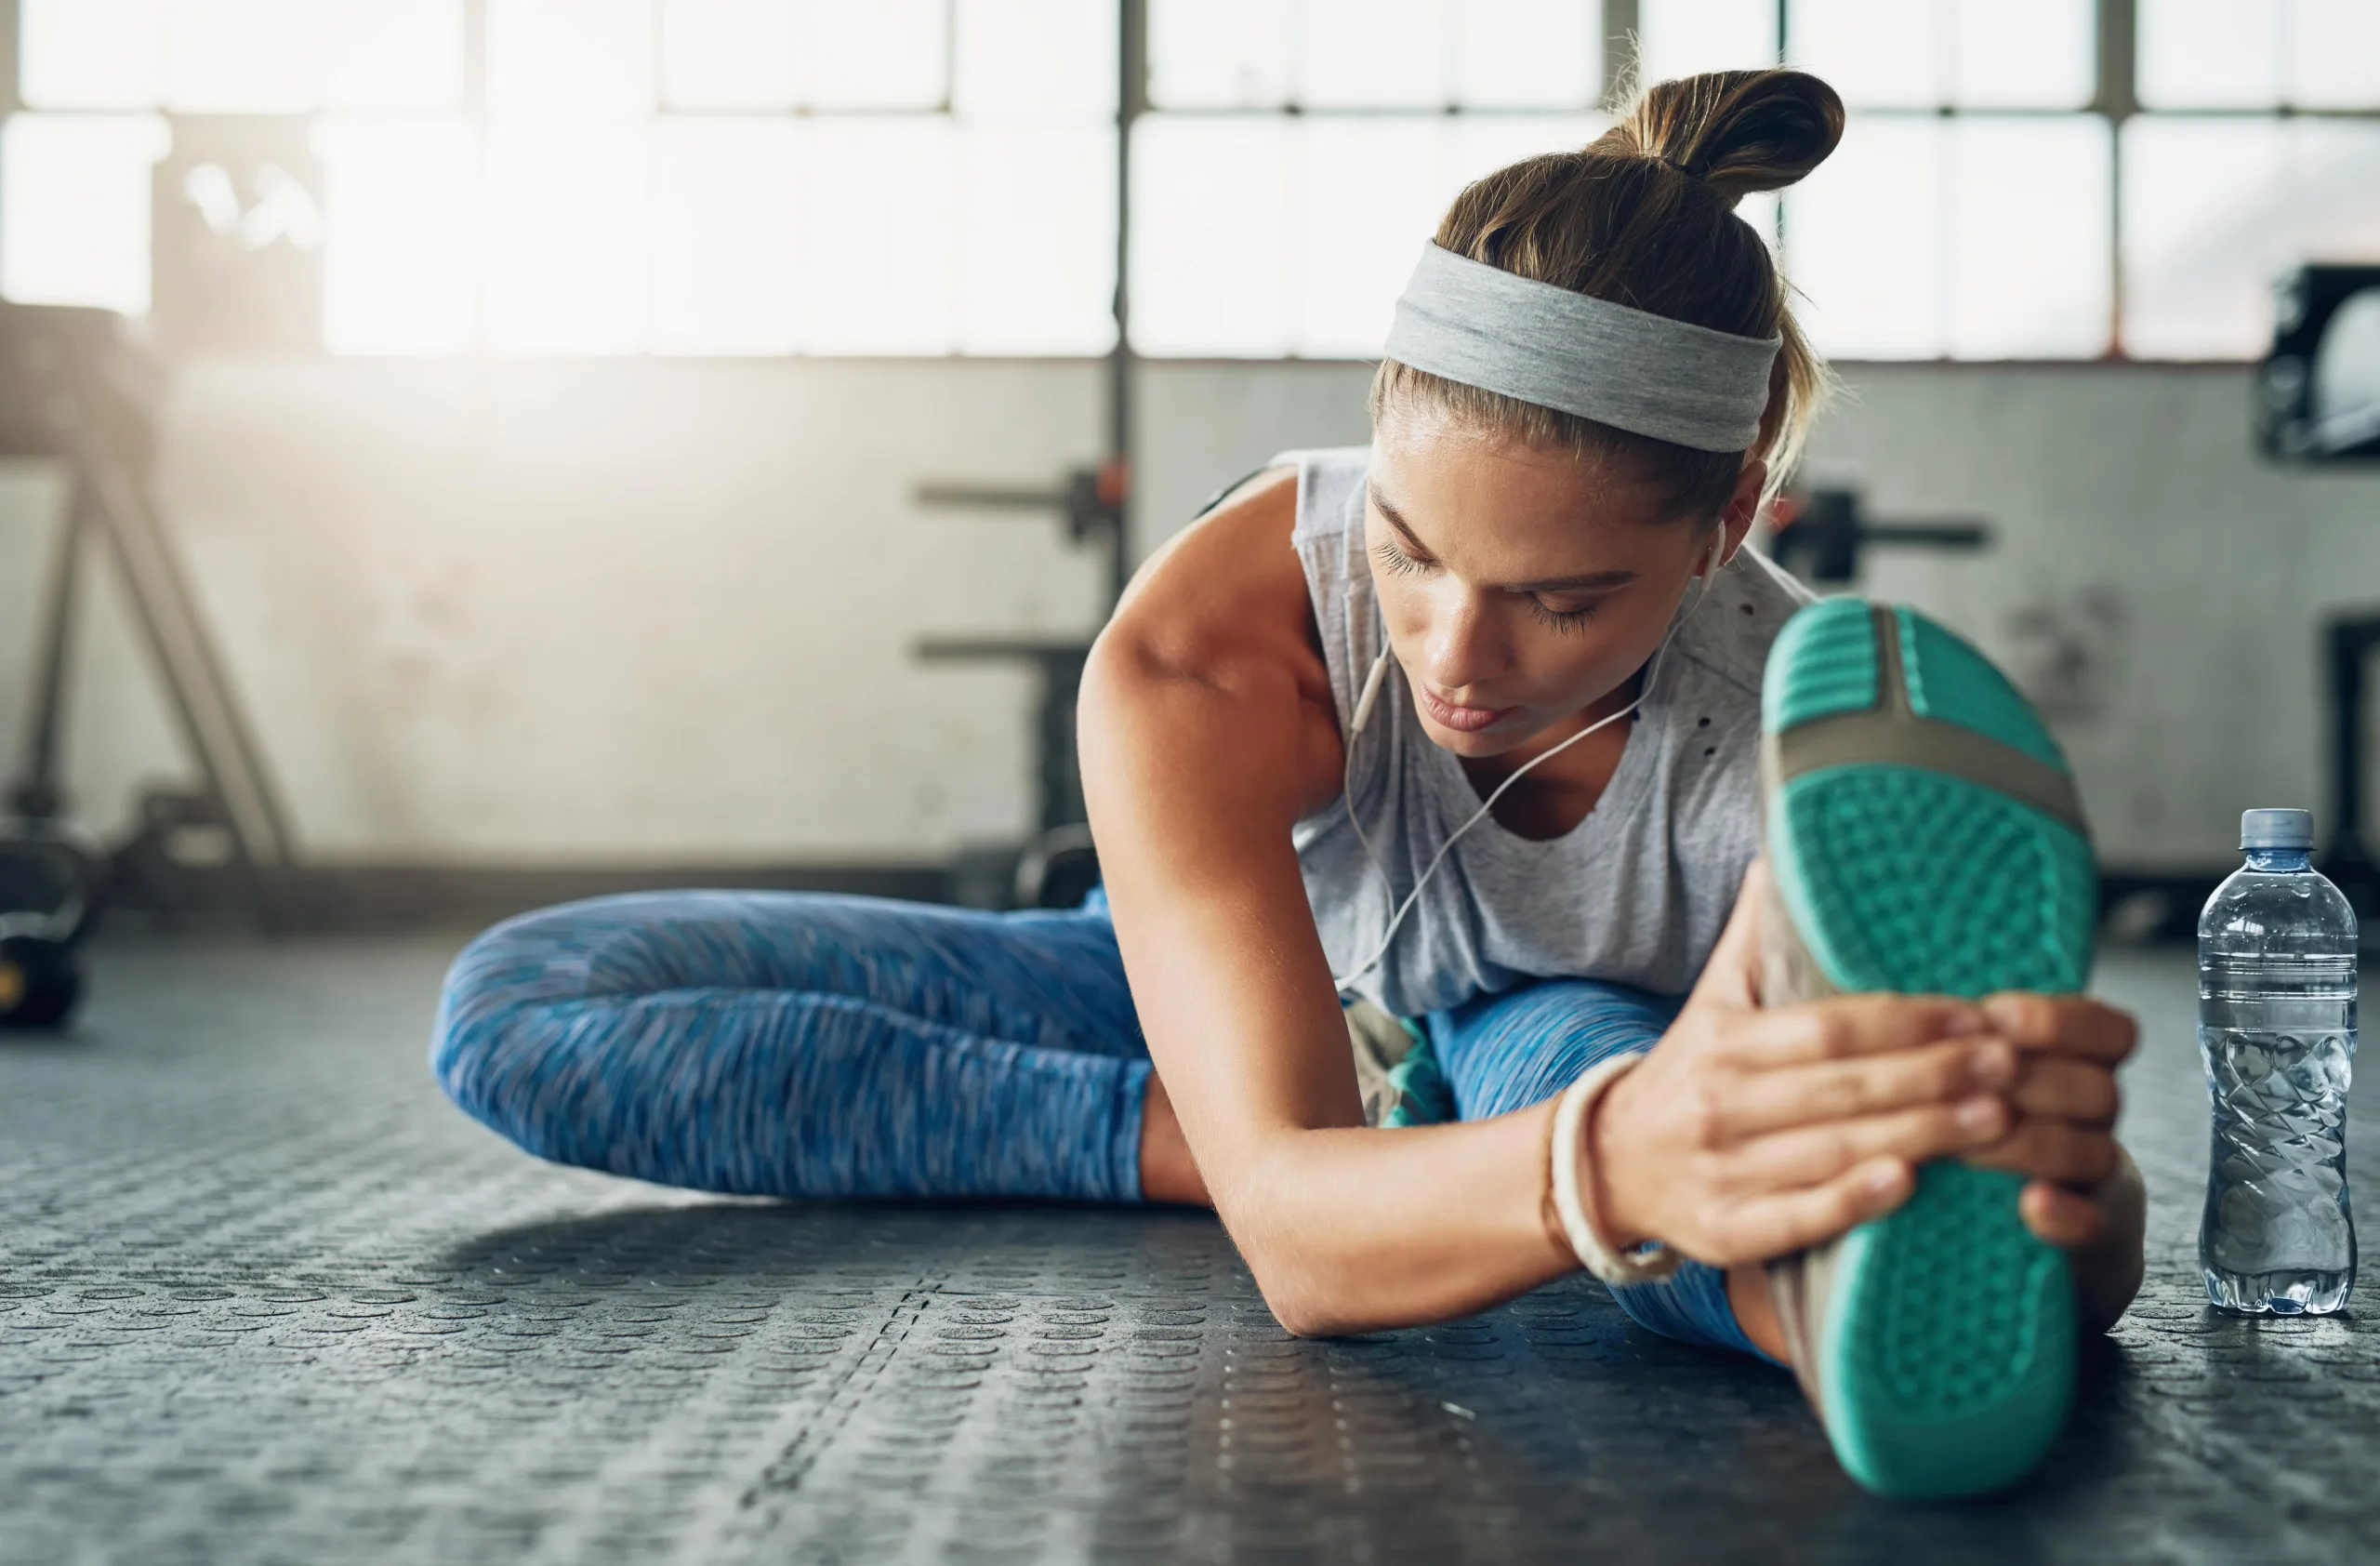 Woman stretching her hamstrings on the gym floor. She has on a grey headband, wire earphones, blue pants and blue soles of her shoes. There is a water bottle beside her, she seems focused and is looking down.